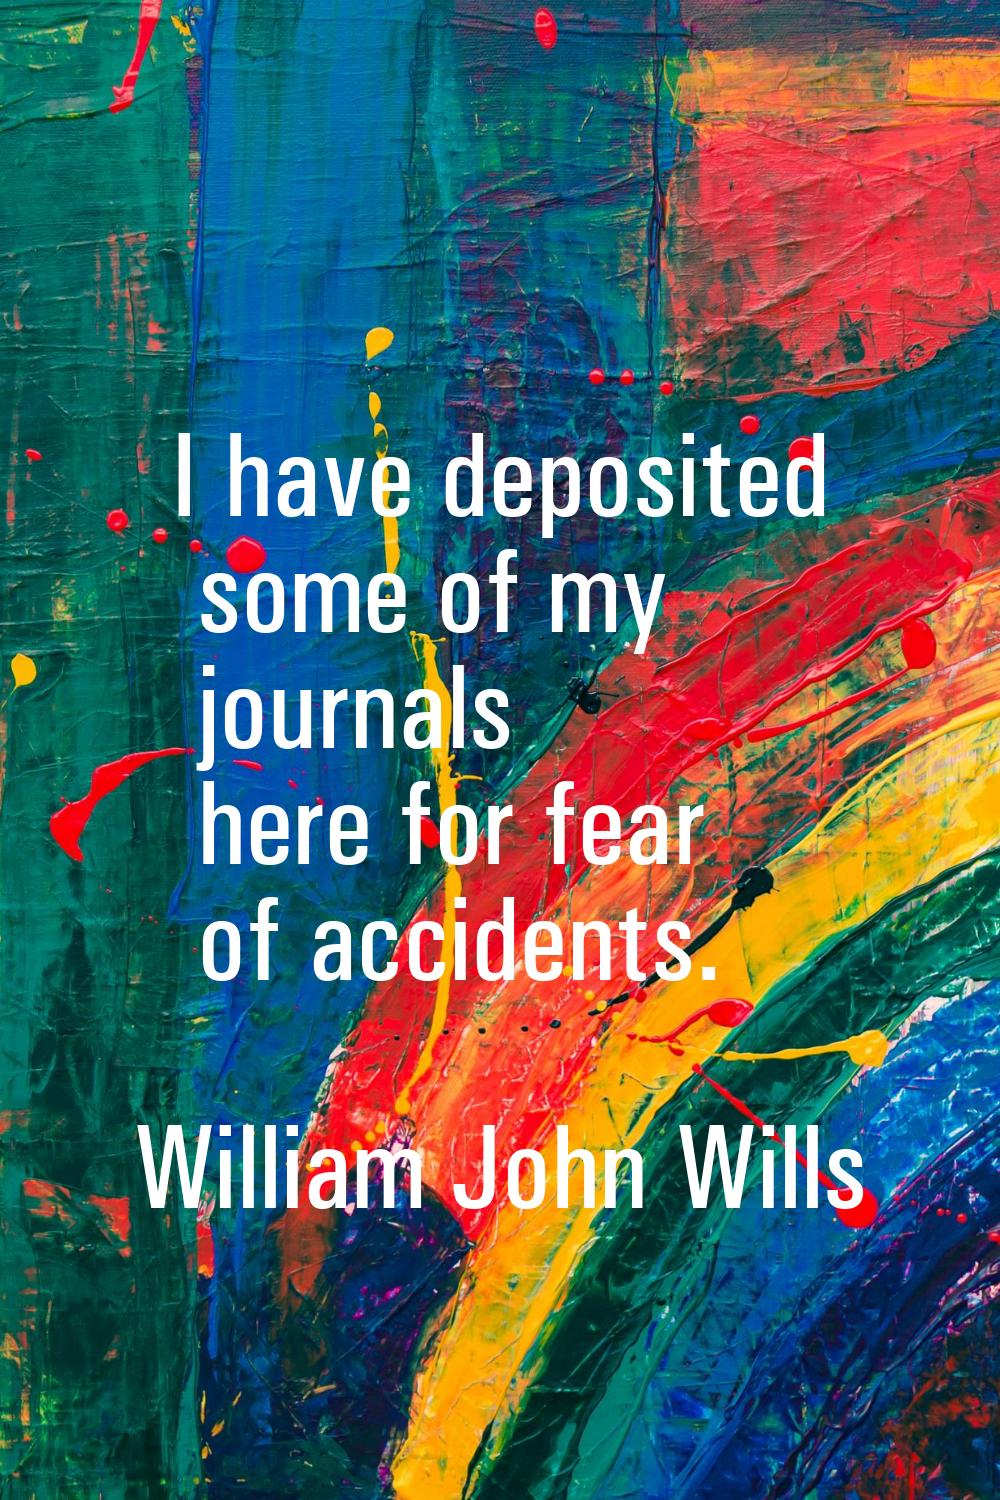 I have deposited some of my journals here for fear of accidents.